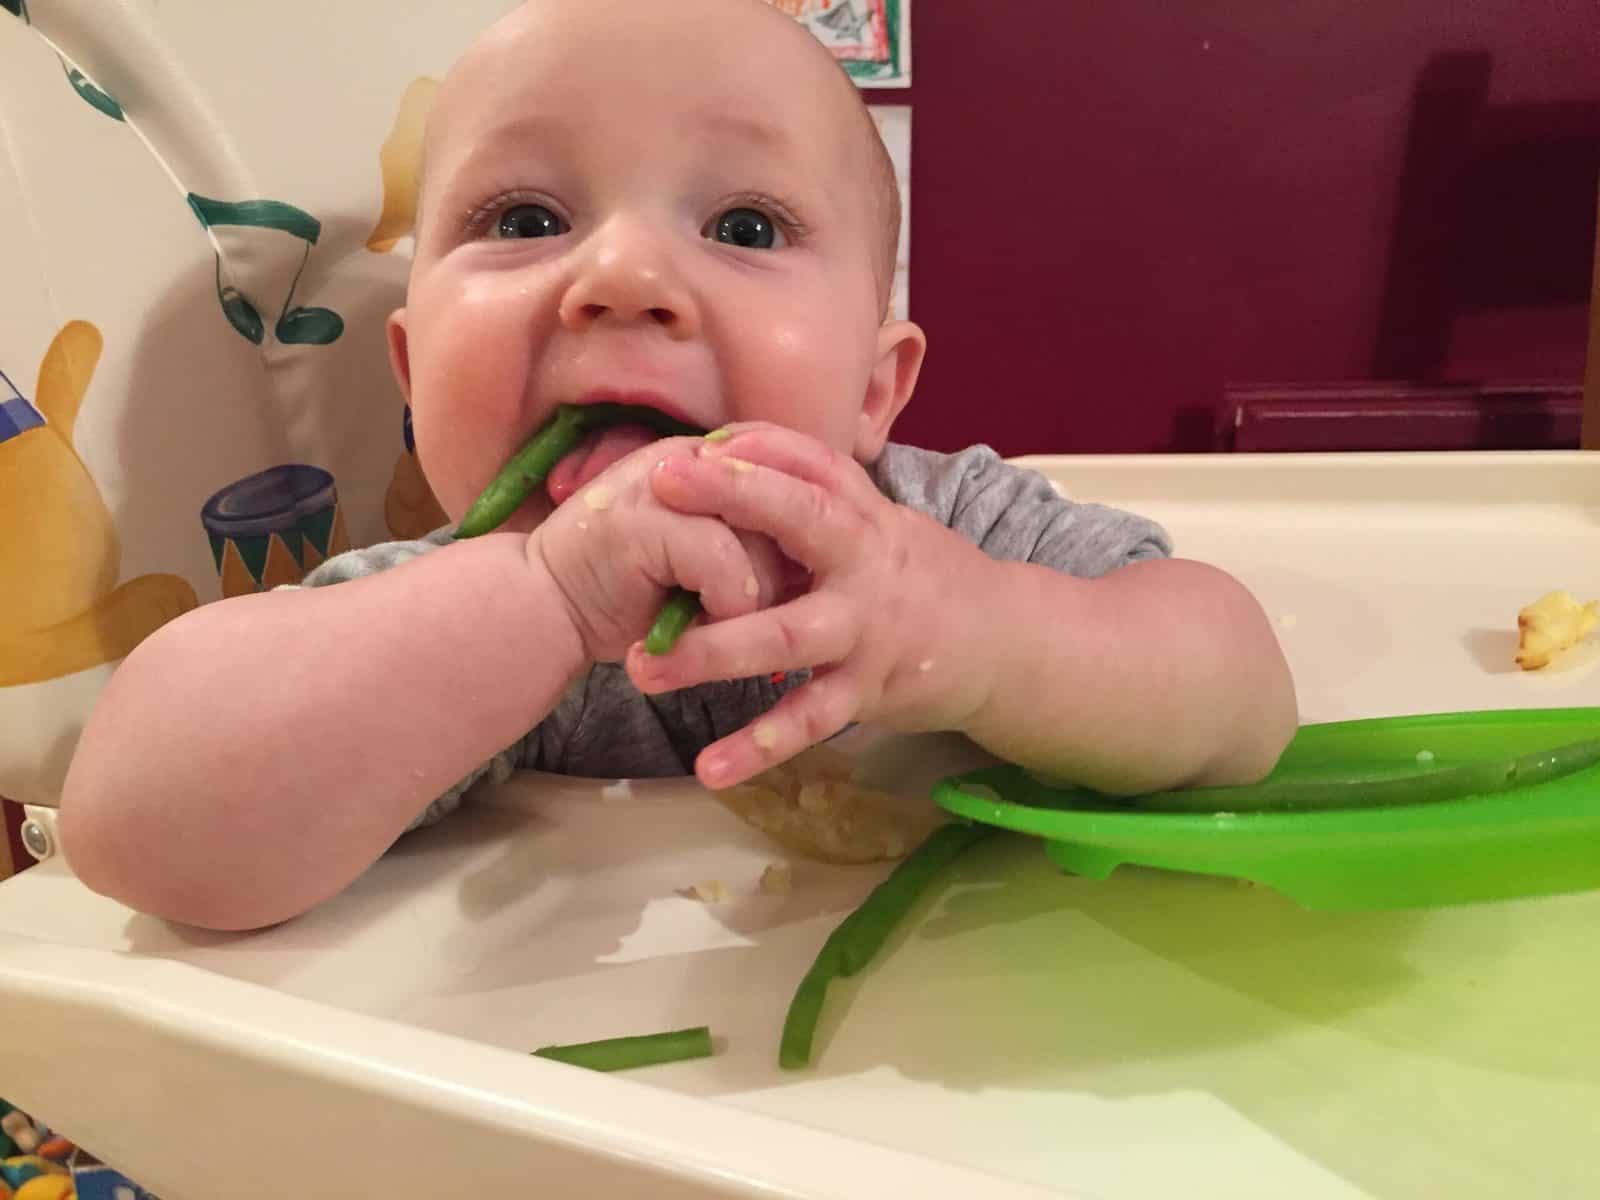 Stage 1 baby food: When is a child ready to start solids?